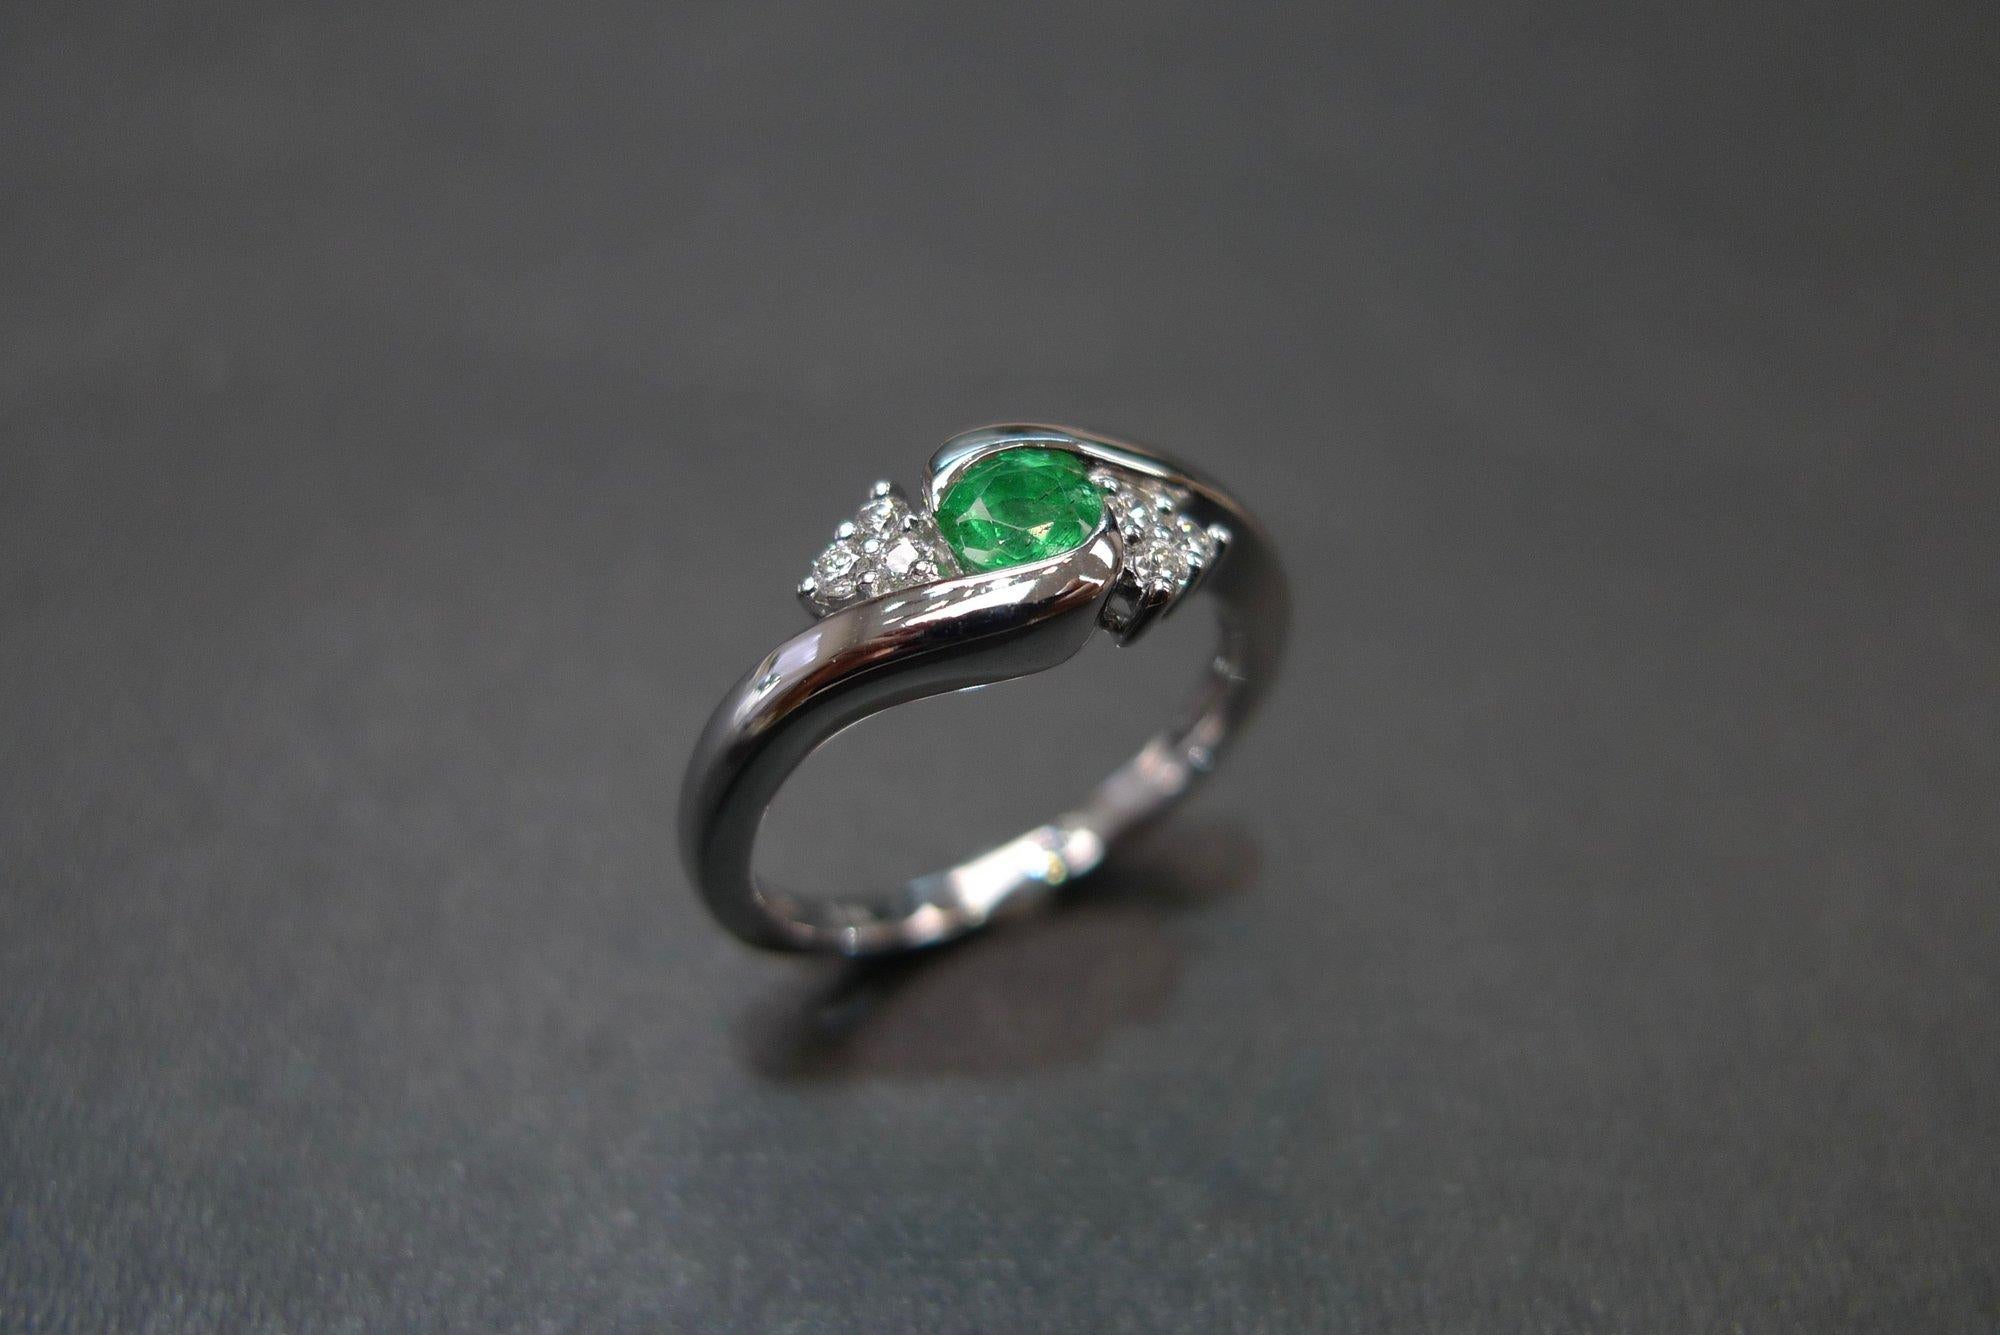 For Sale:  Tension Twist Round Cut Emerald and Diamond Engagement Ring in 18K White Gold 3